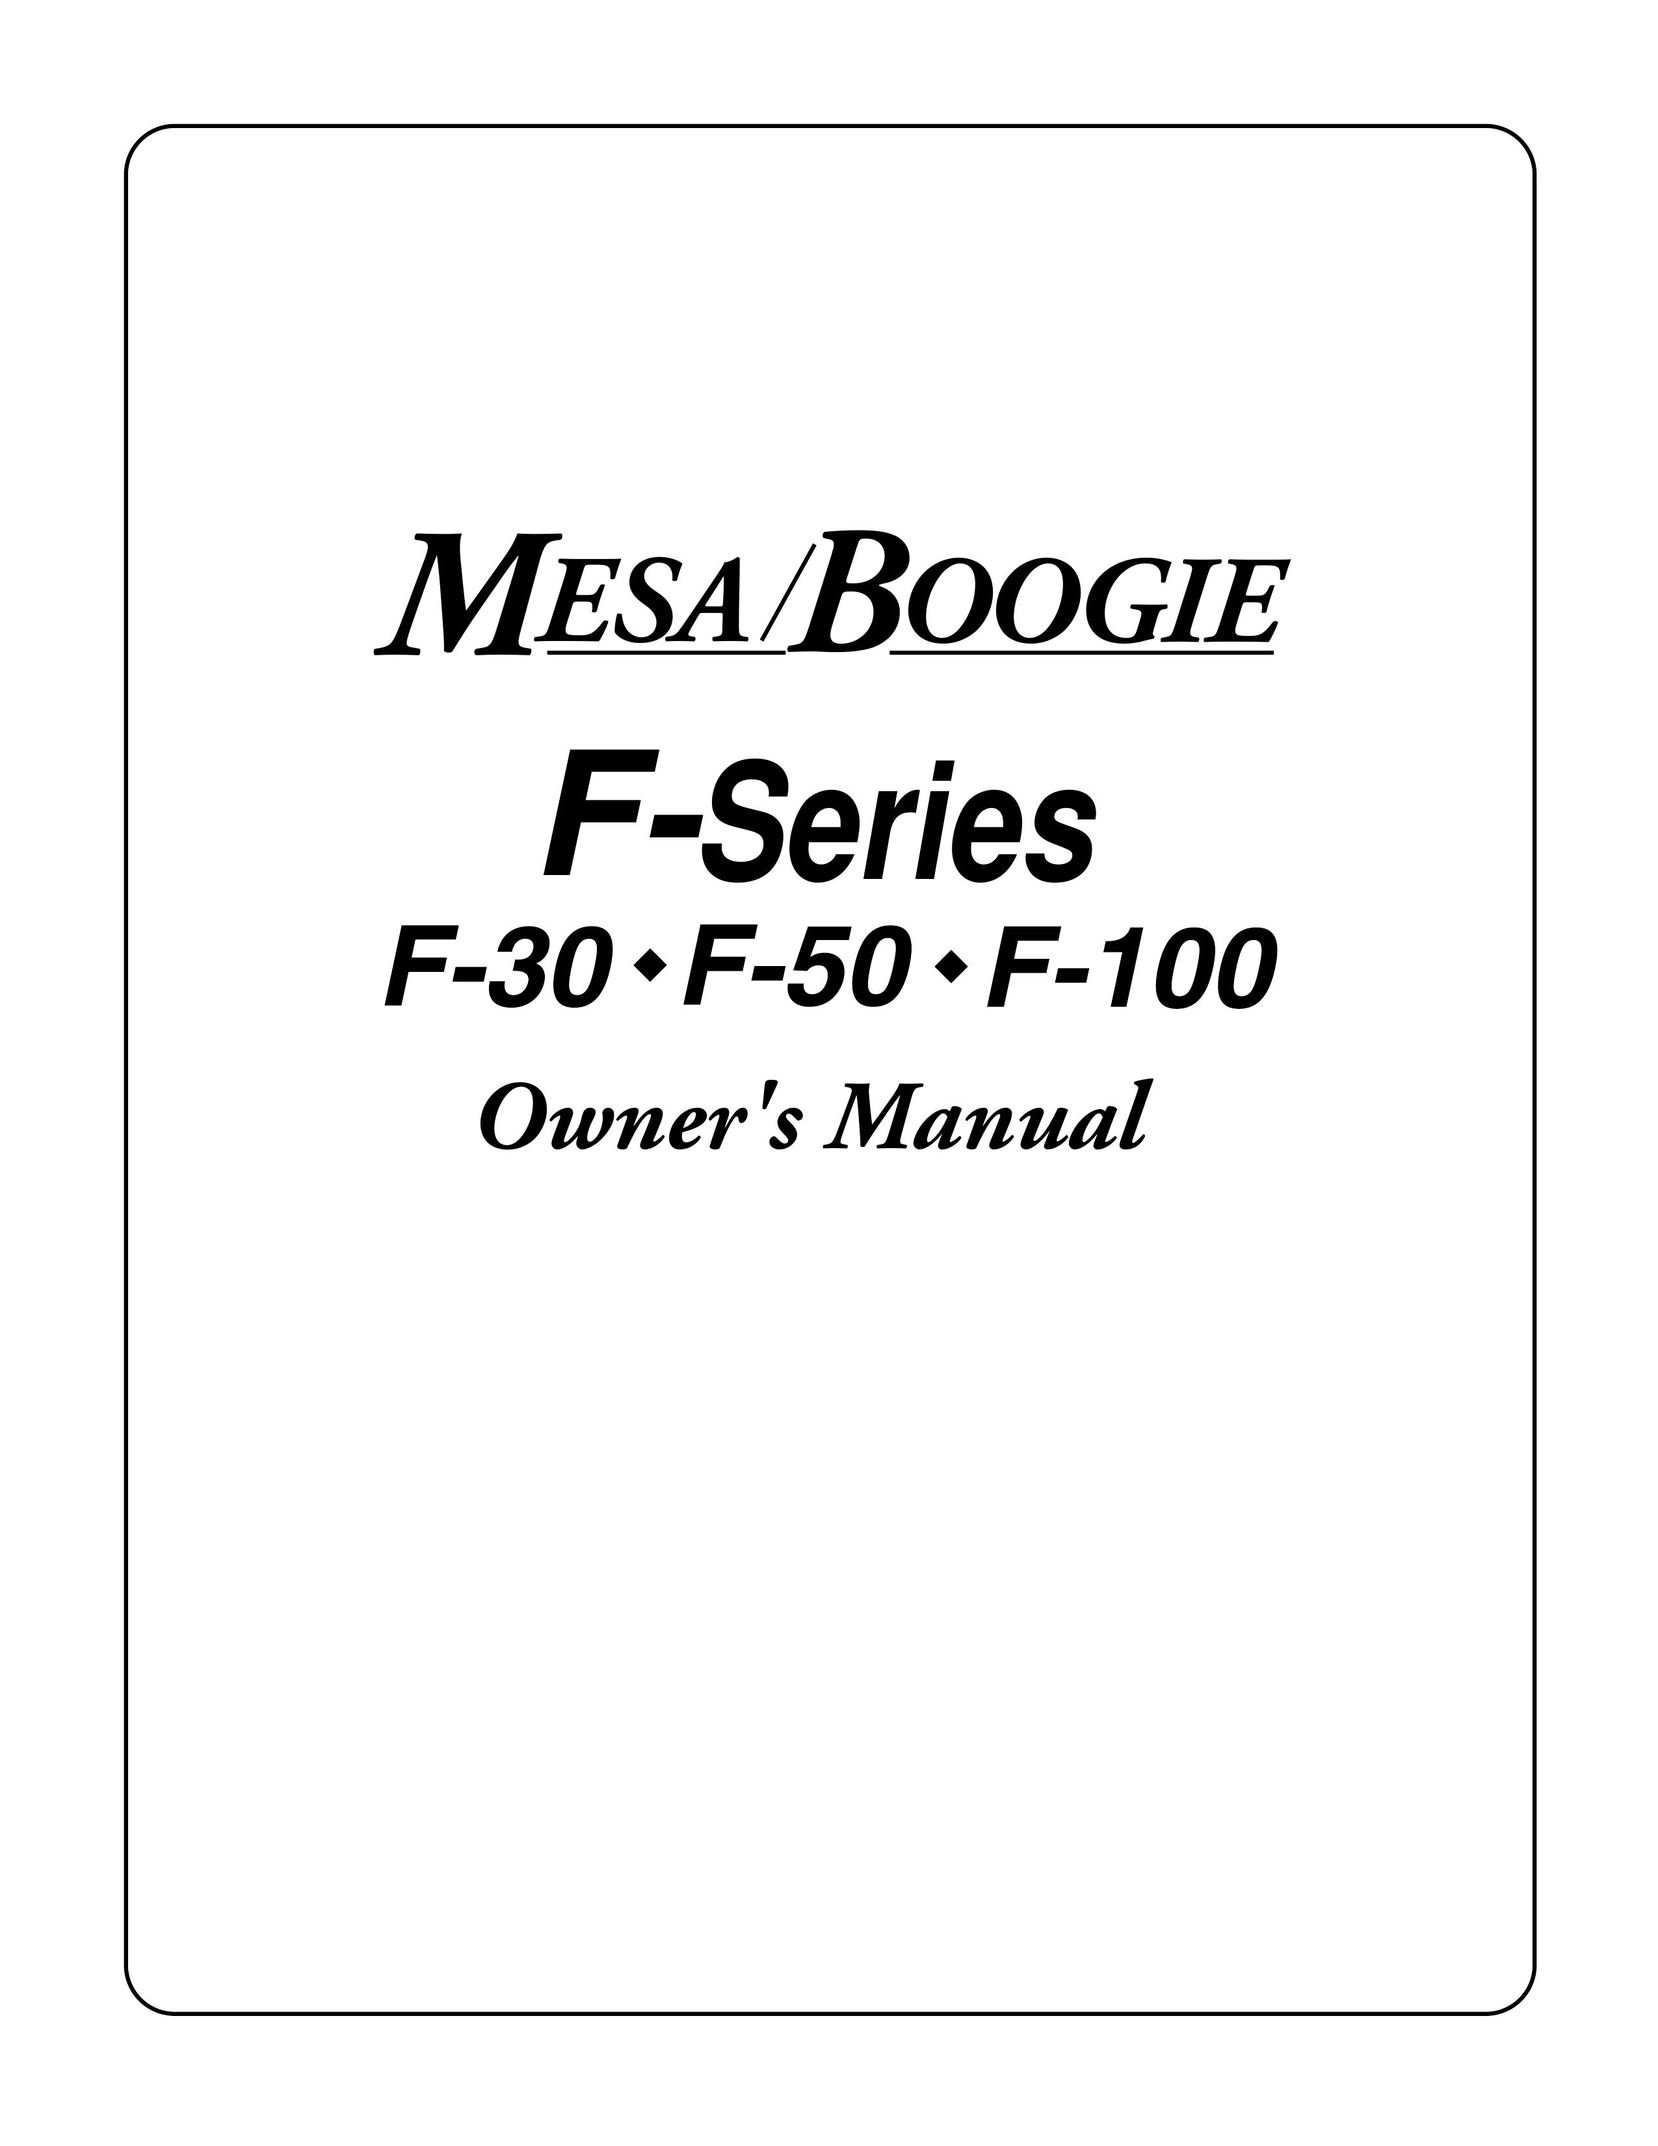 Mesa/Boogie F-30, F-50, F-100 Stereo Receiver User Manual